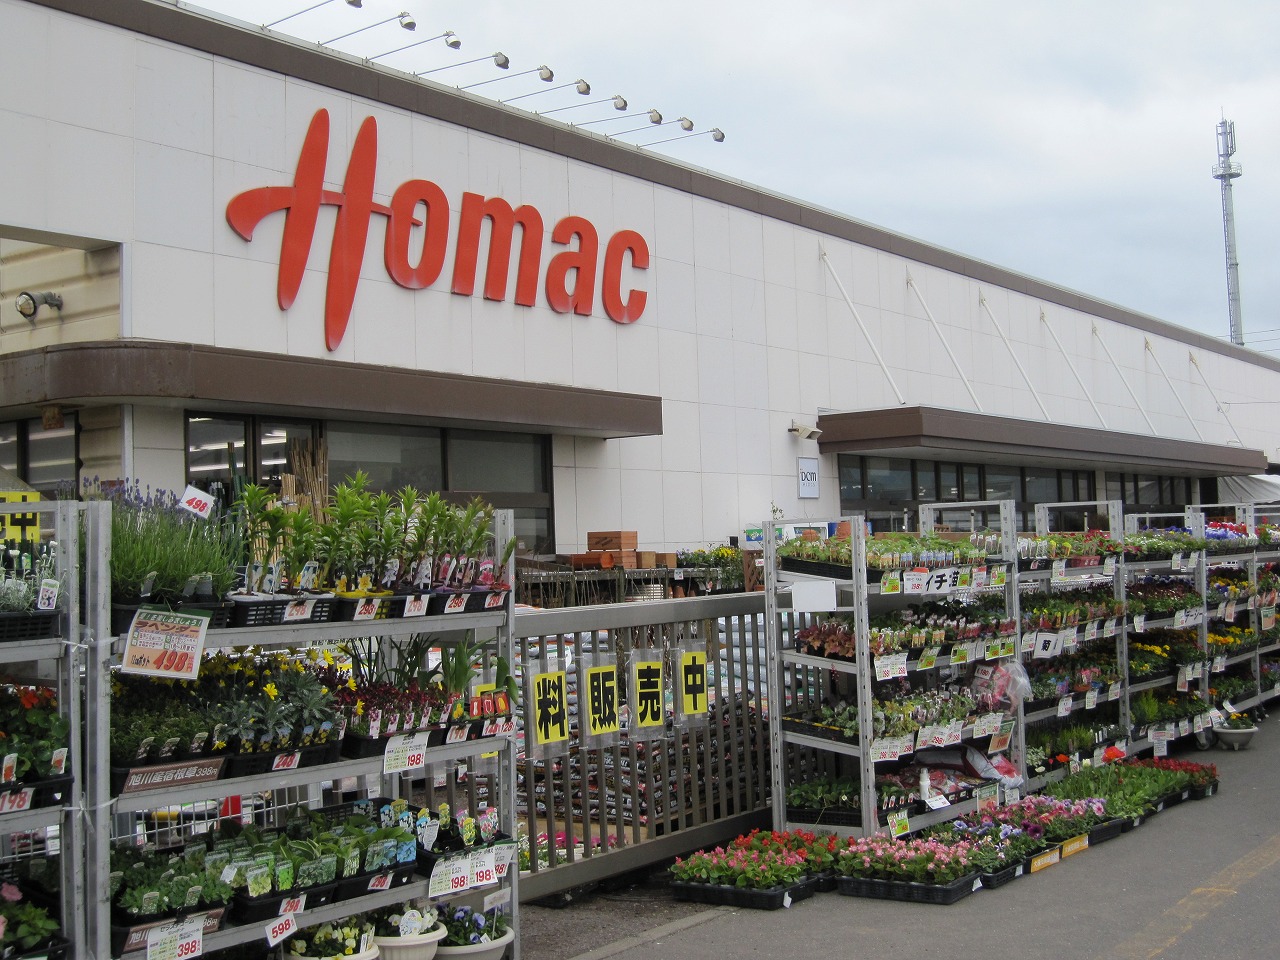 Home center. Homac Corporation Itoi to the store (hardware store) 1891m